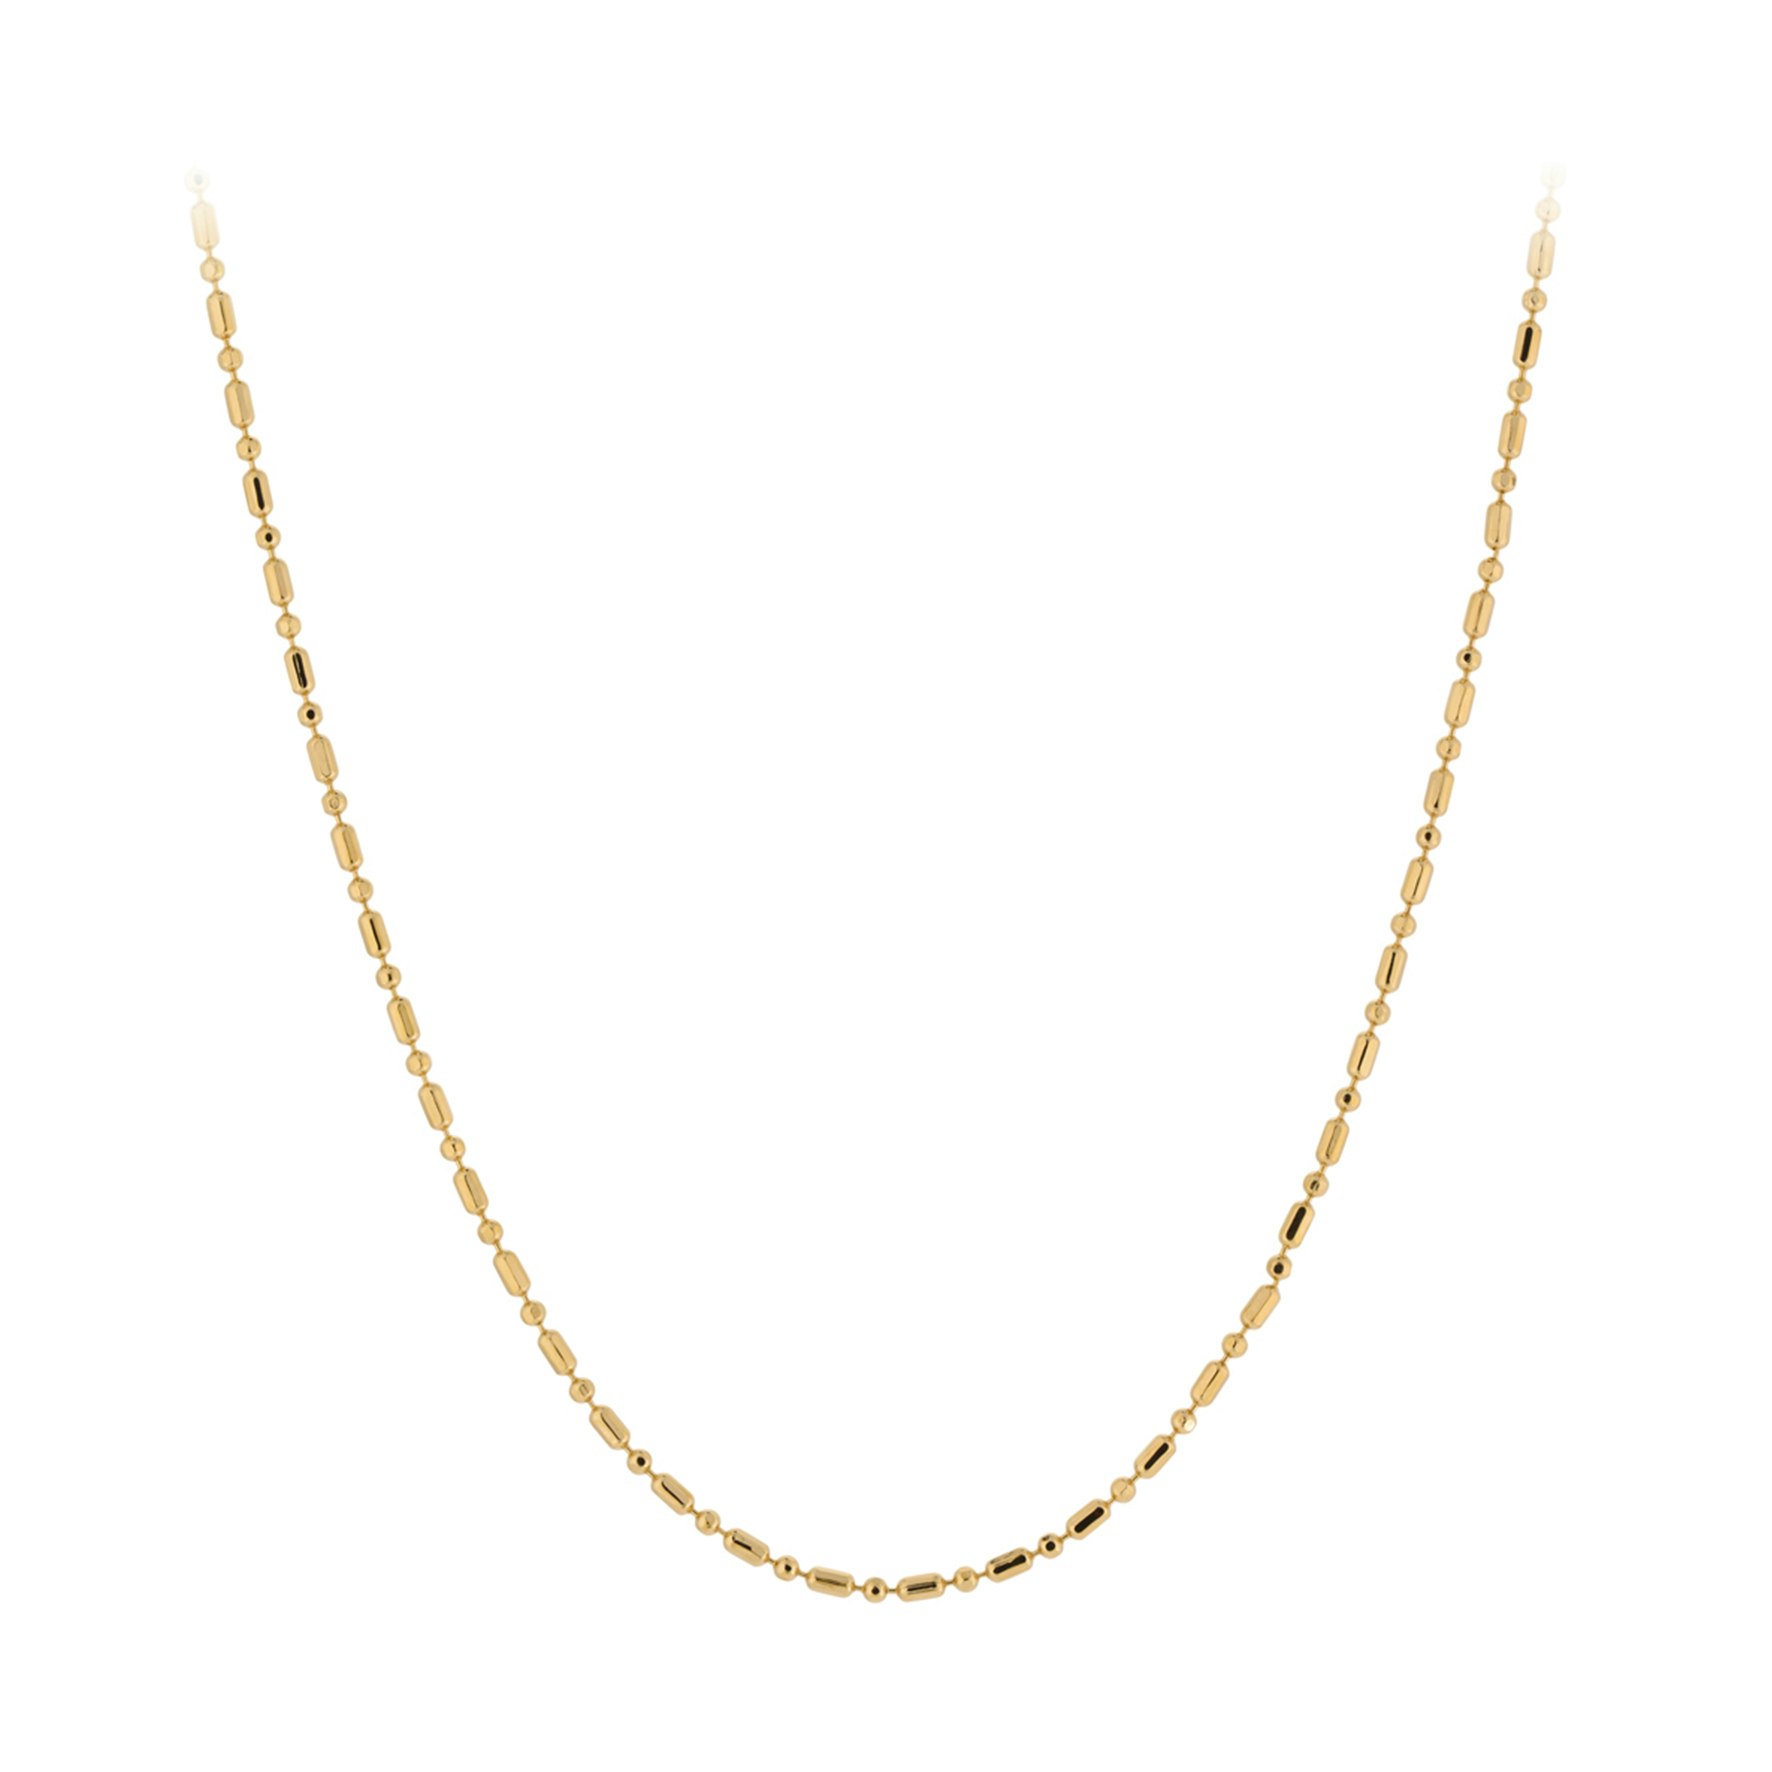 Evelyn Necklace from Pernille Corydon in Goldplated-Silver Sterling 925